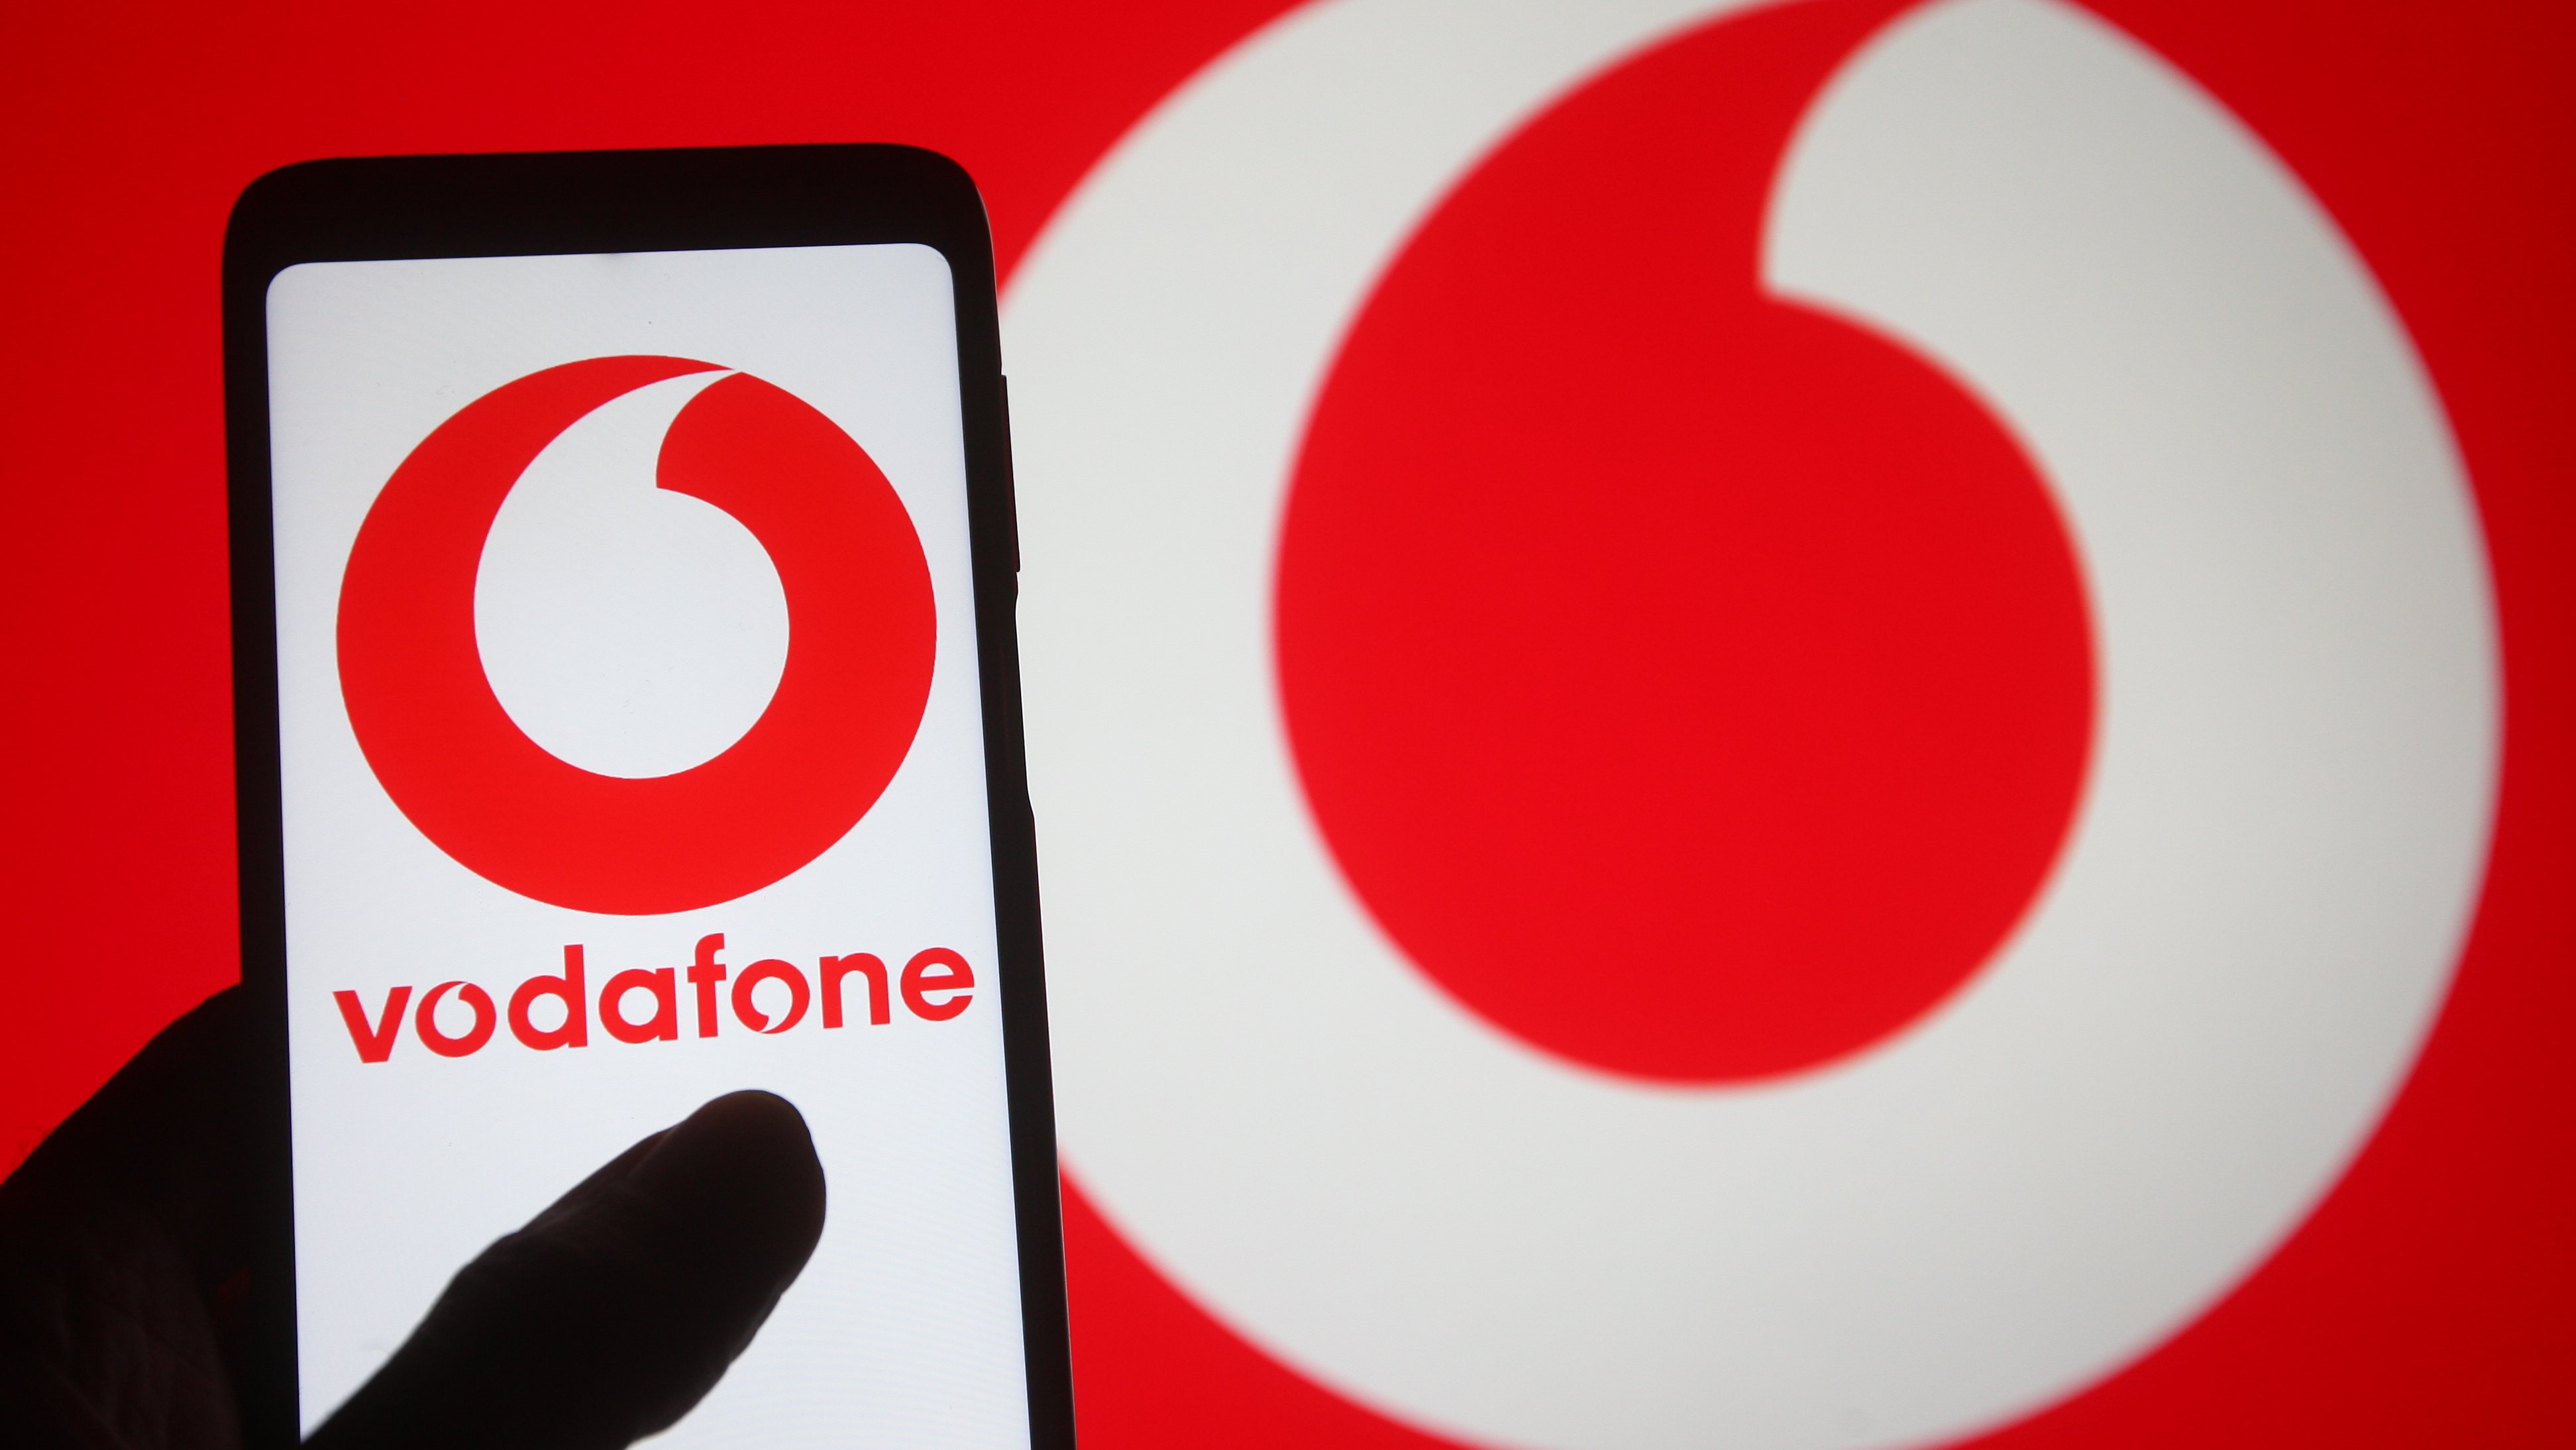 In this photo illustration, the Vodafone logo of a